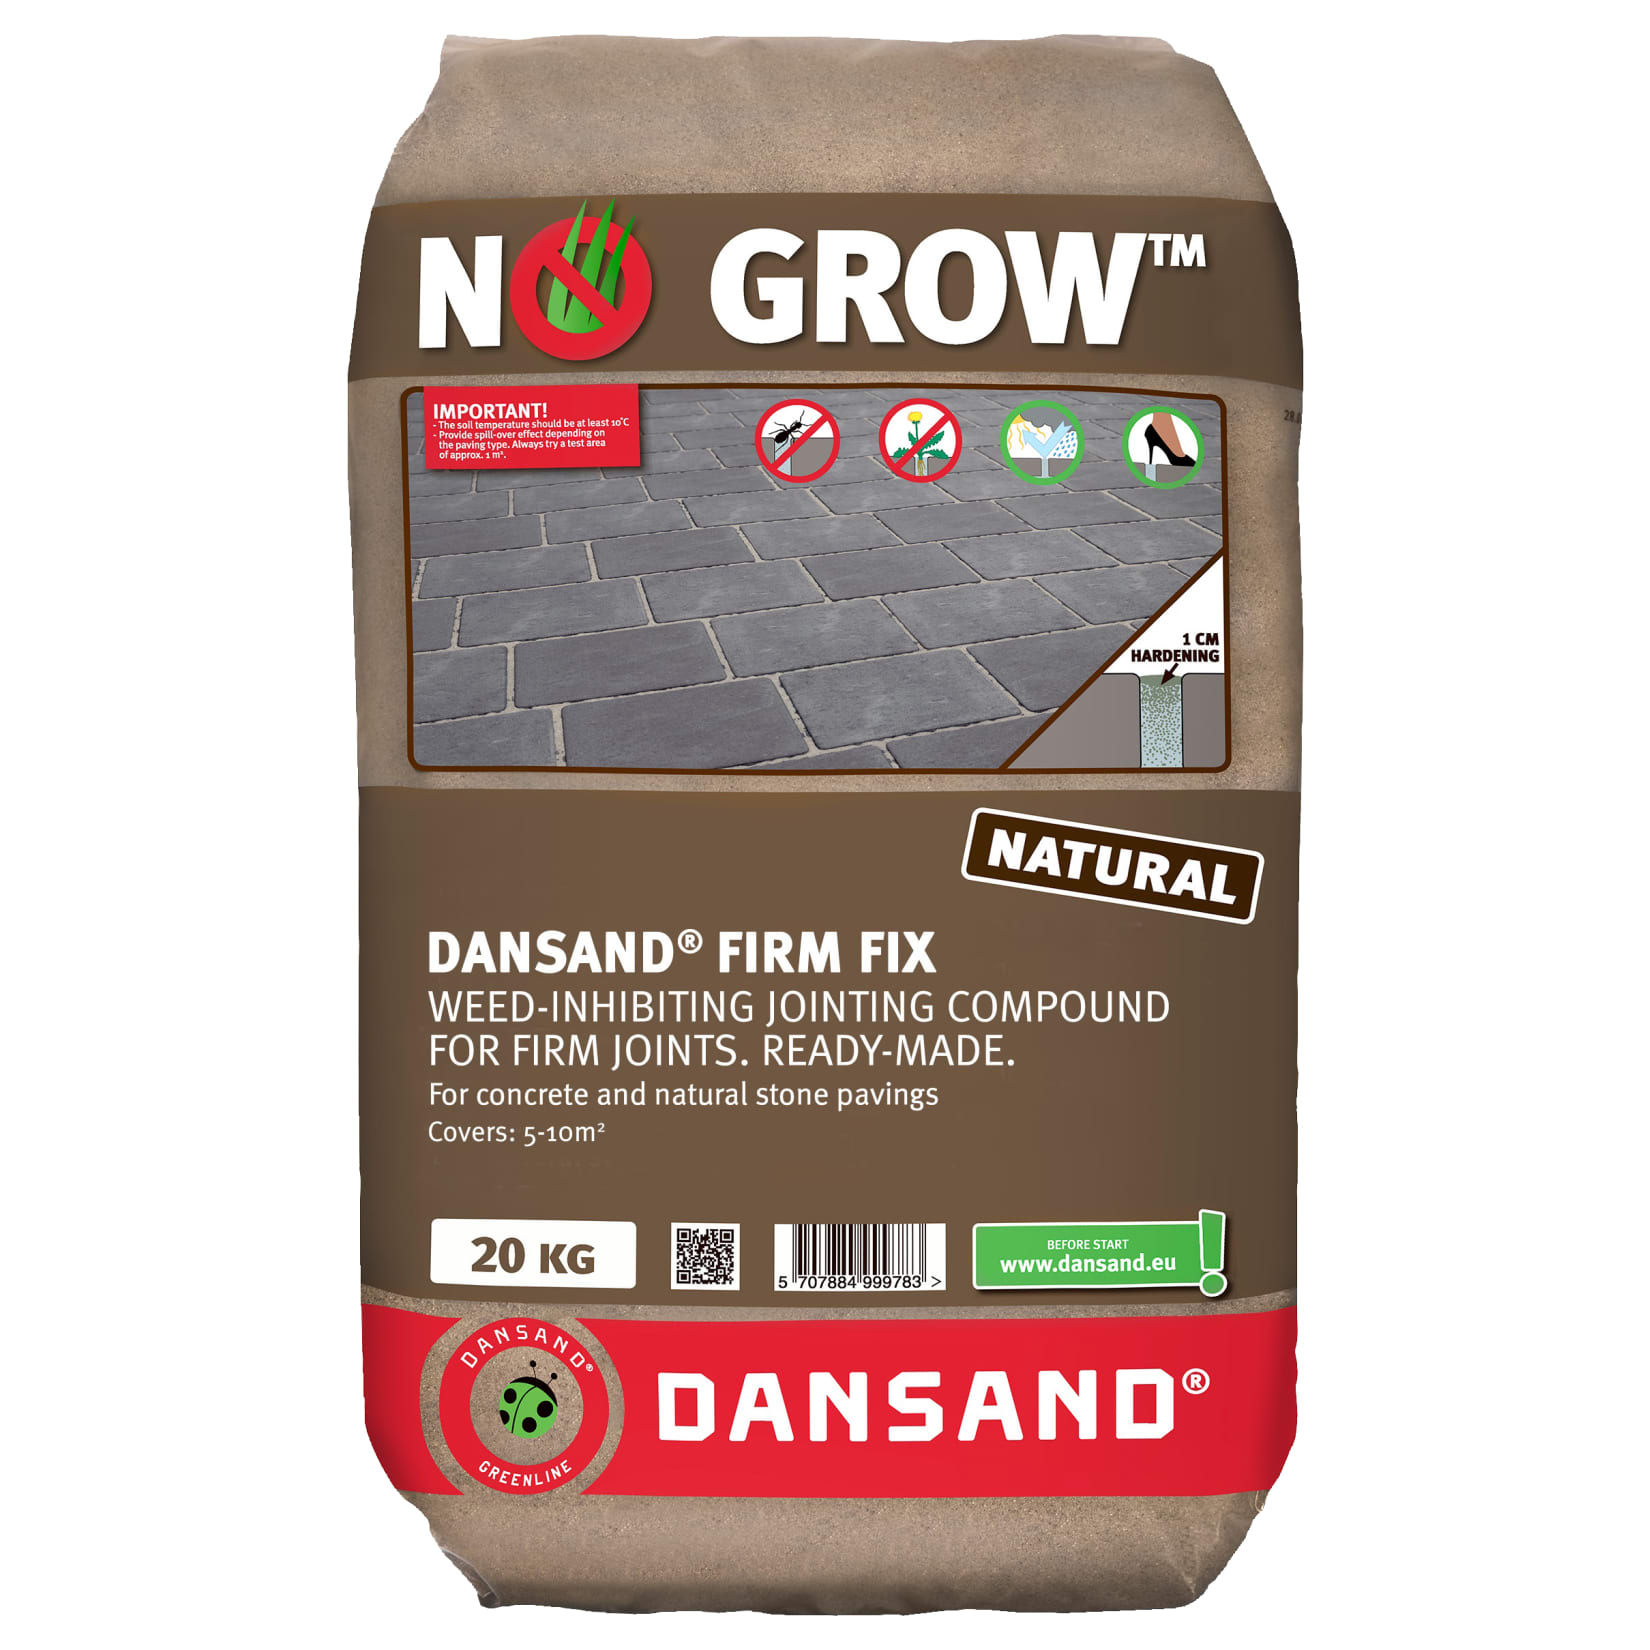 Dansand NO GROW Block Paving Jointing Compound - 20kg | Wickes.co.uk